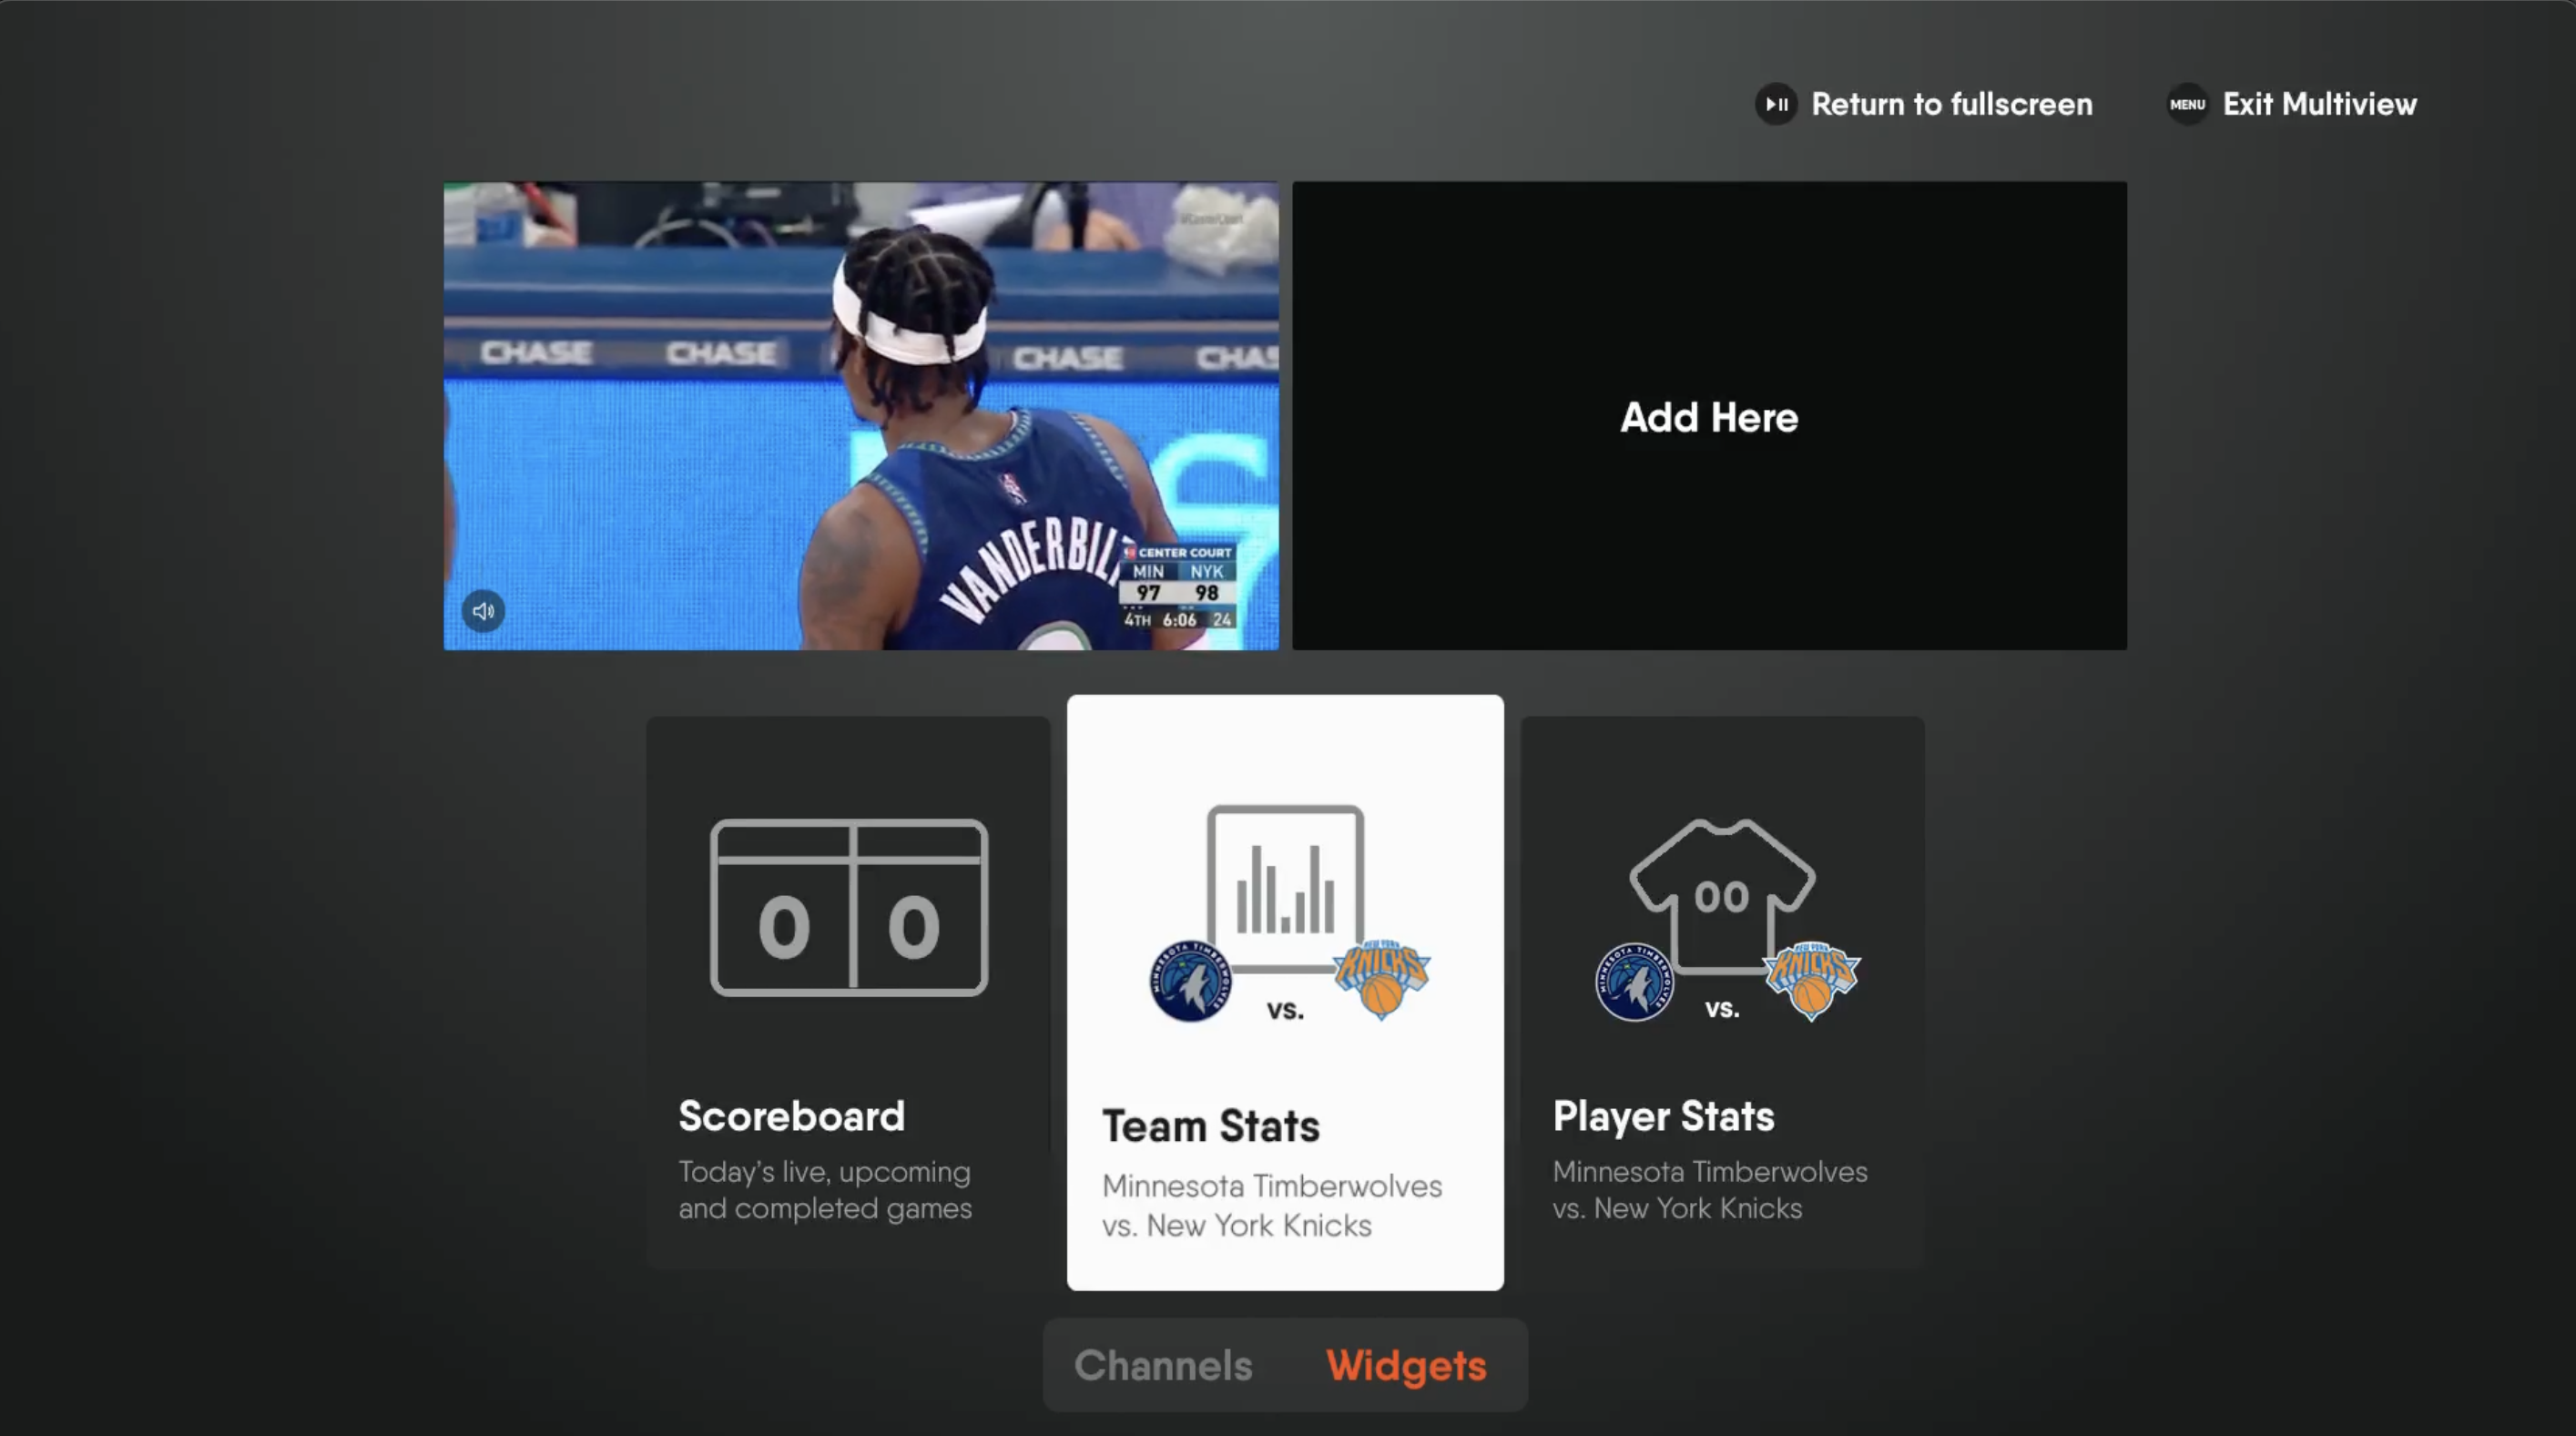 Available widgets for Multiview on the FuboTV app for Apple TV; select from SCOREBOARD, TEAM STATS or PLAYER STATS